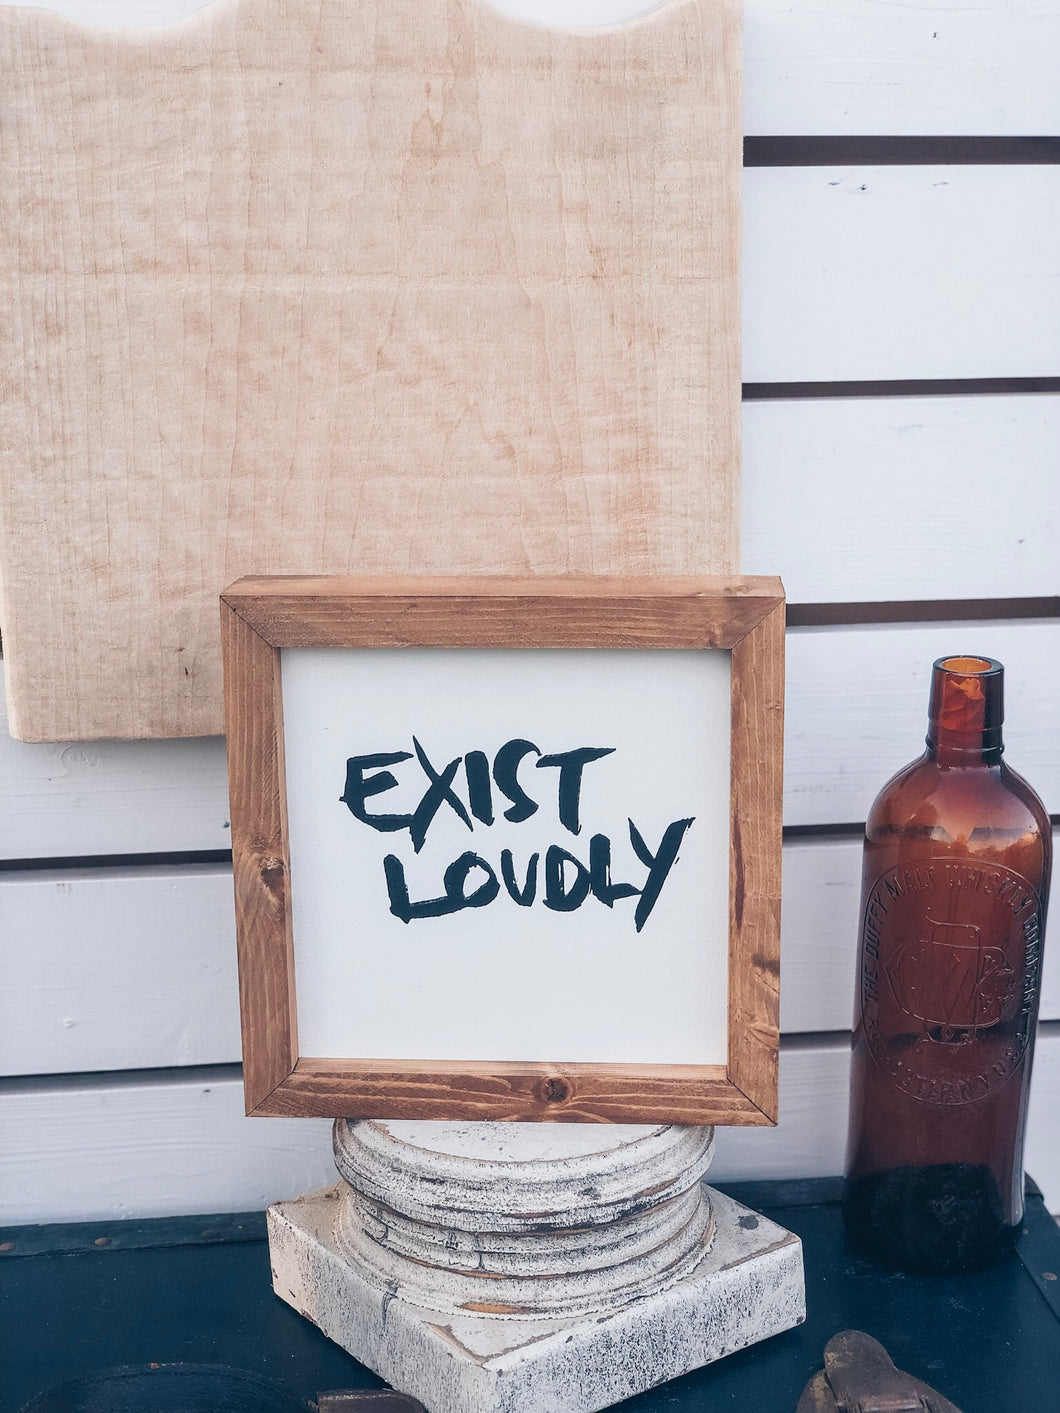 EXIST LOUDLY